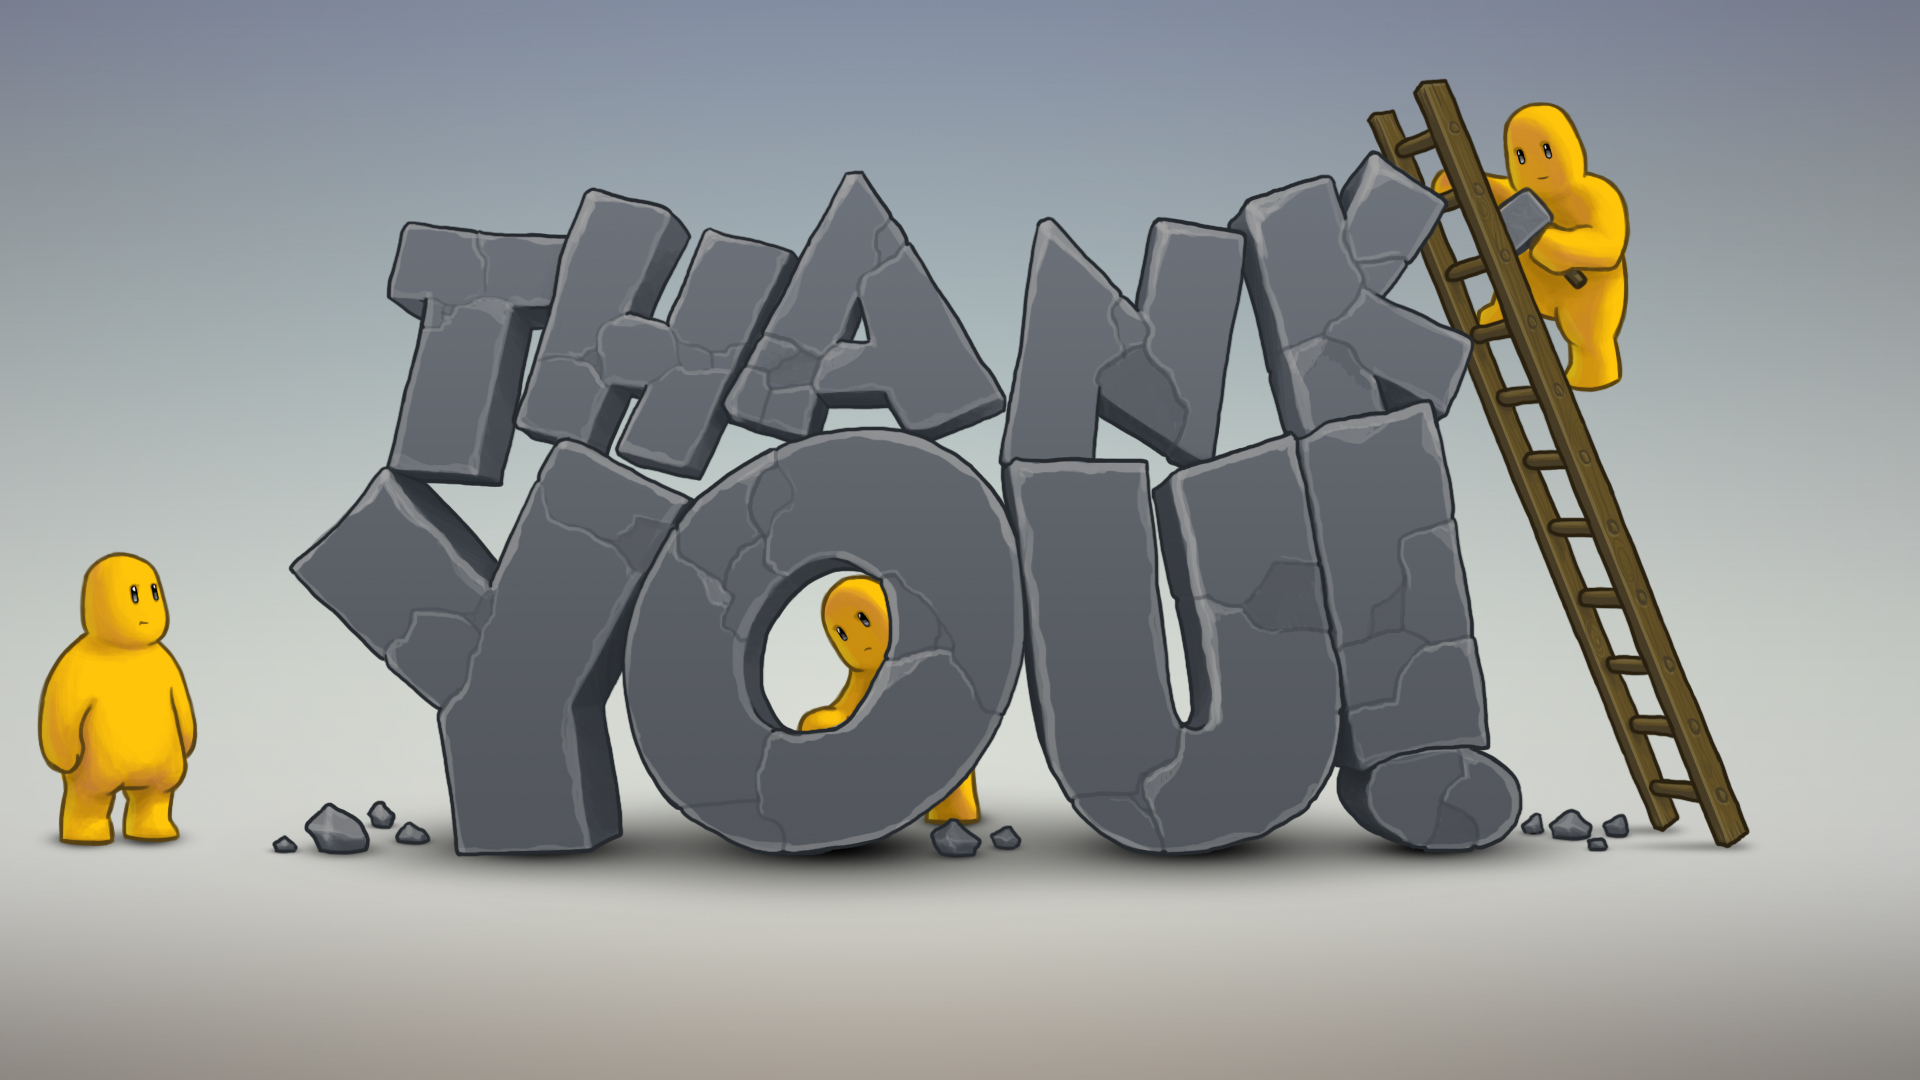 Thank You 3d wallpapers free latest HD Wallpaper under the Thank You